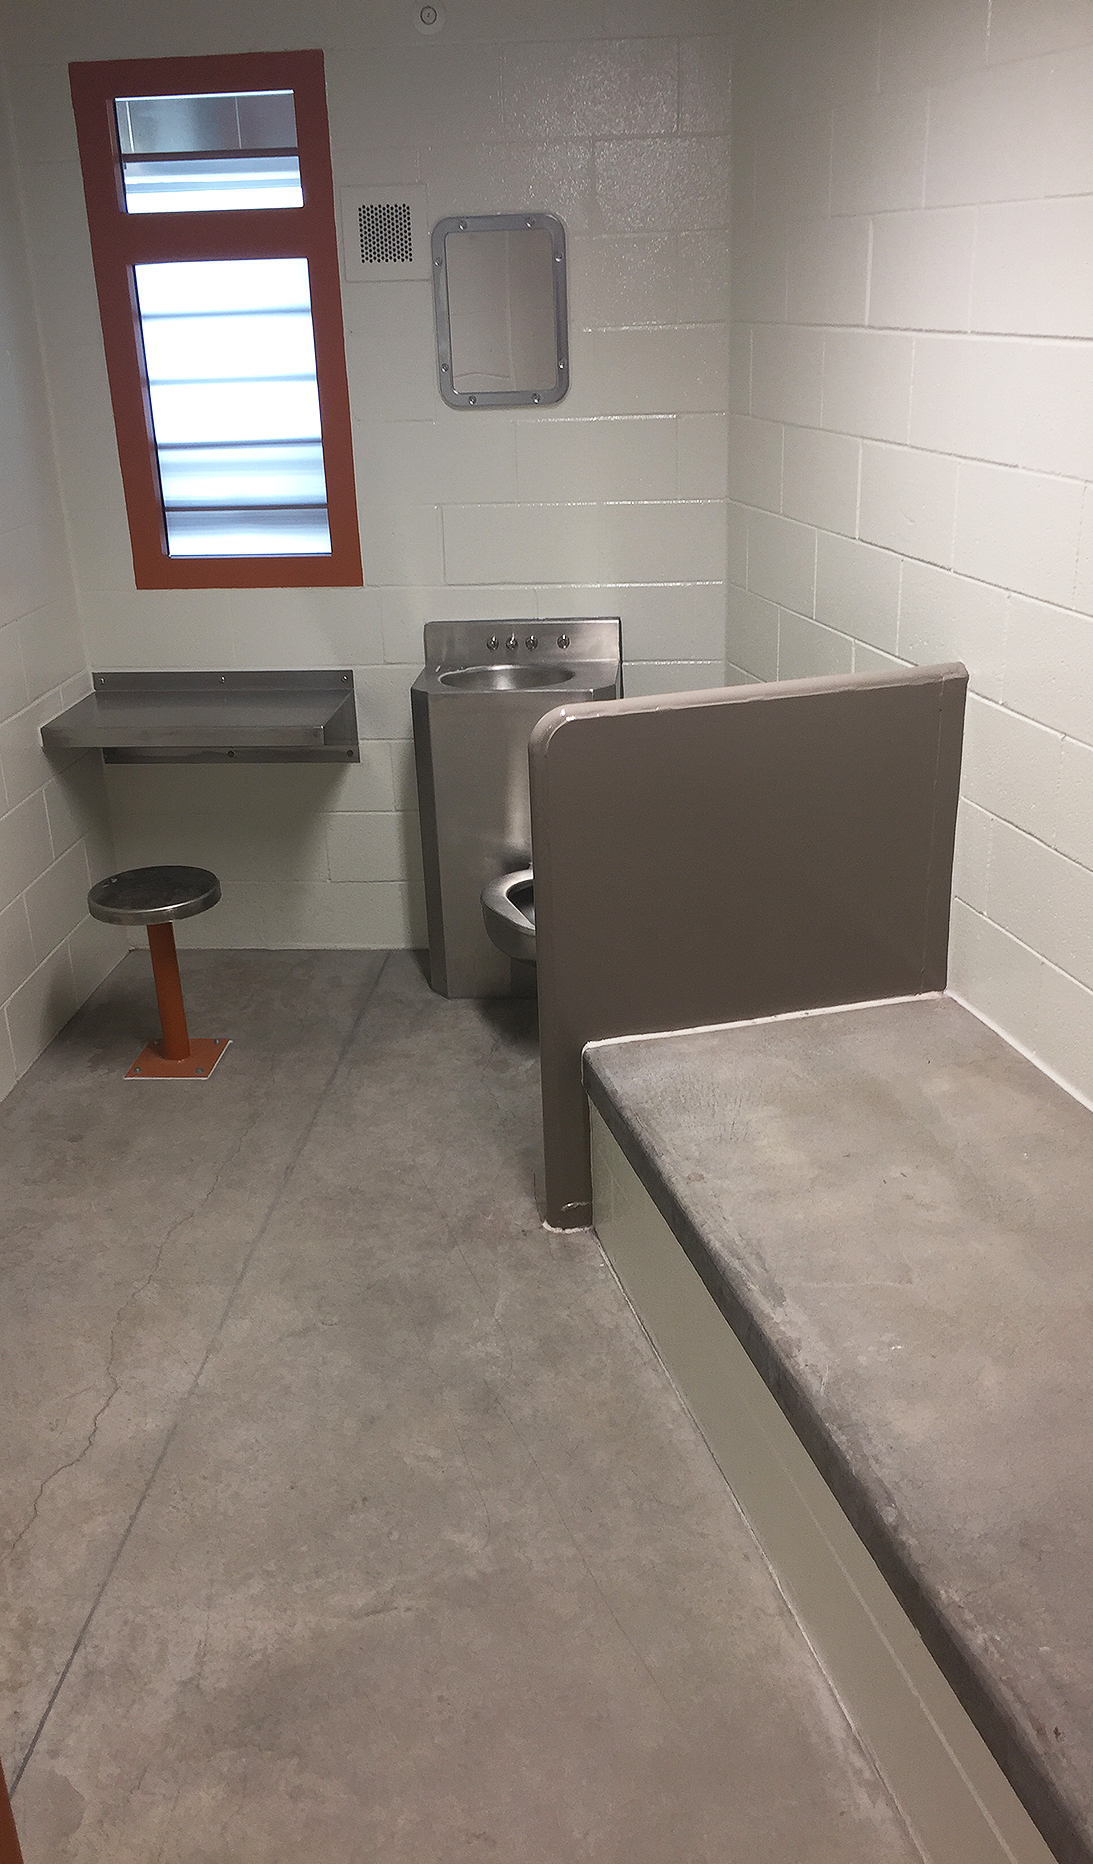 Expanded county jail to ease inmate overcrowding, add valuable space